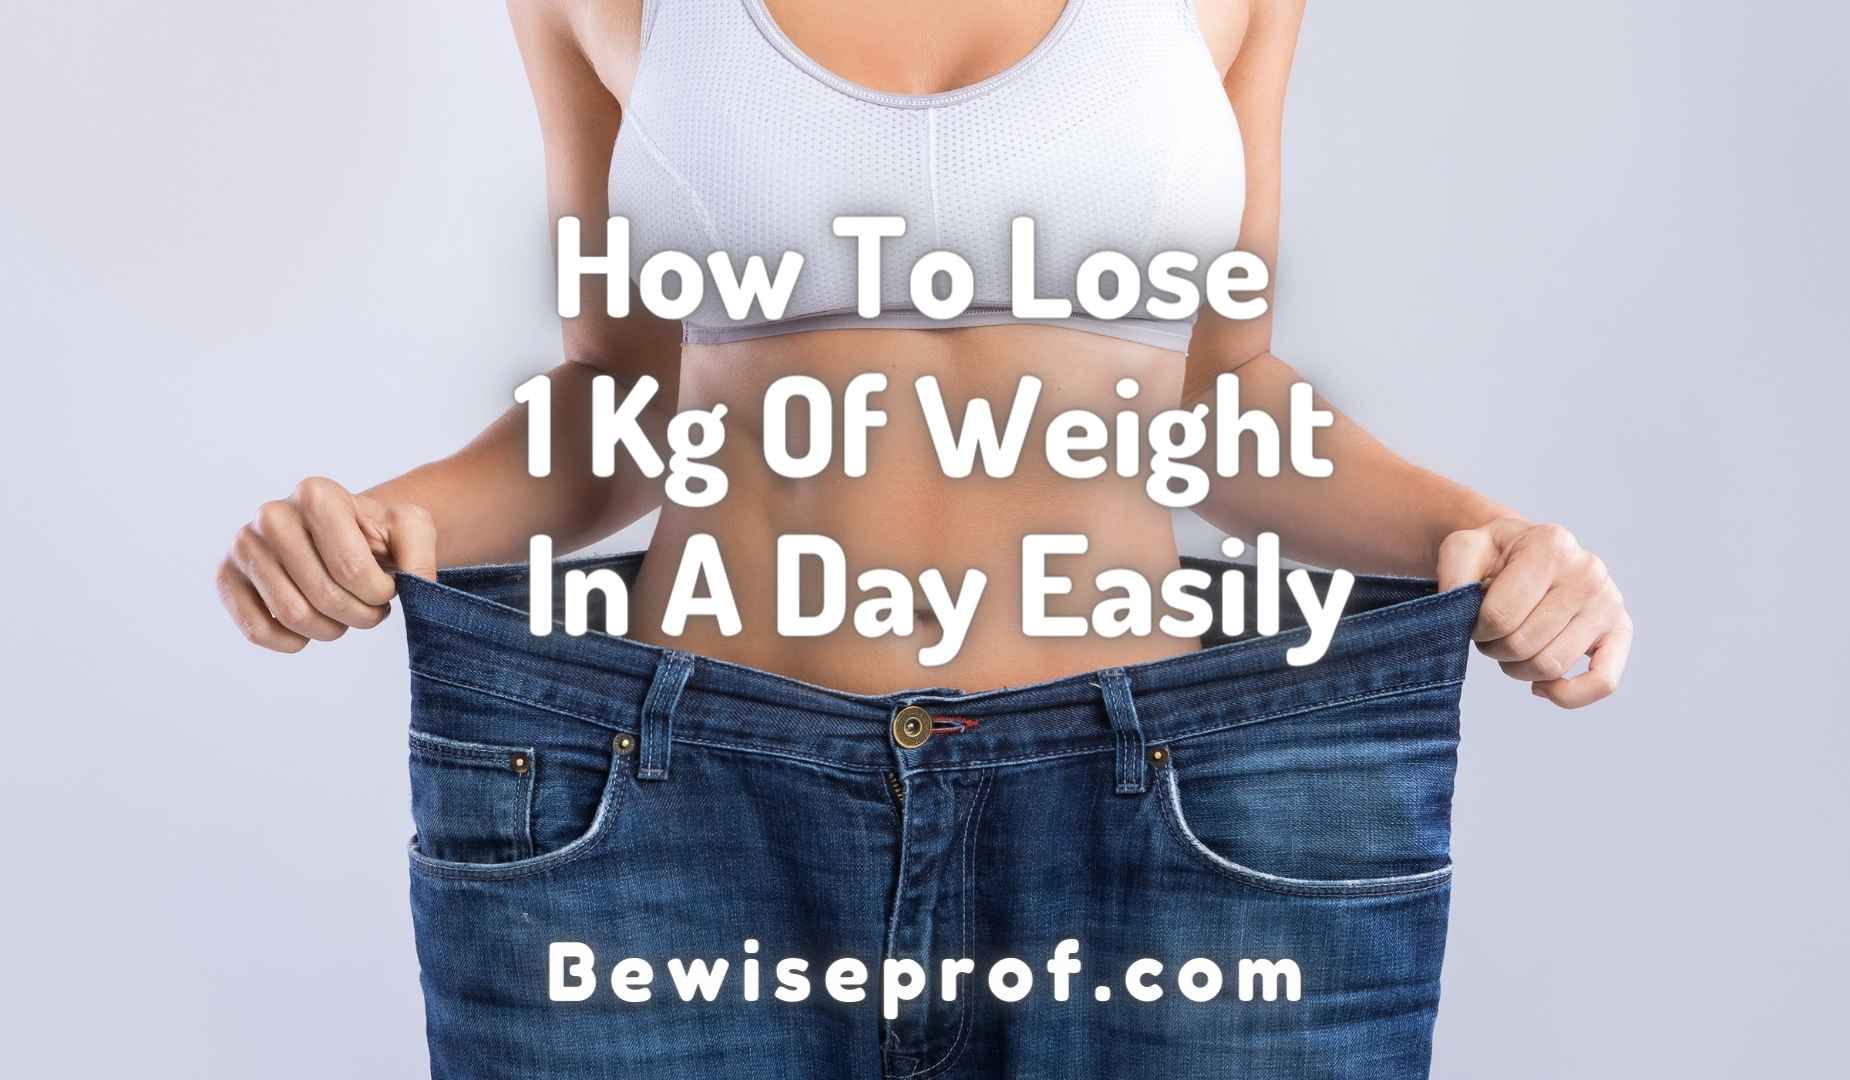 How To Lose 1 Kg Of Weight In A Day Easily